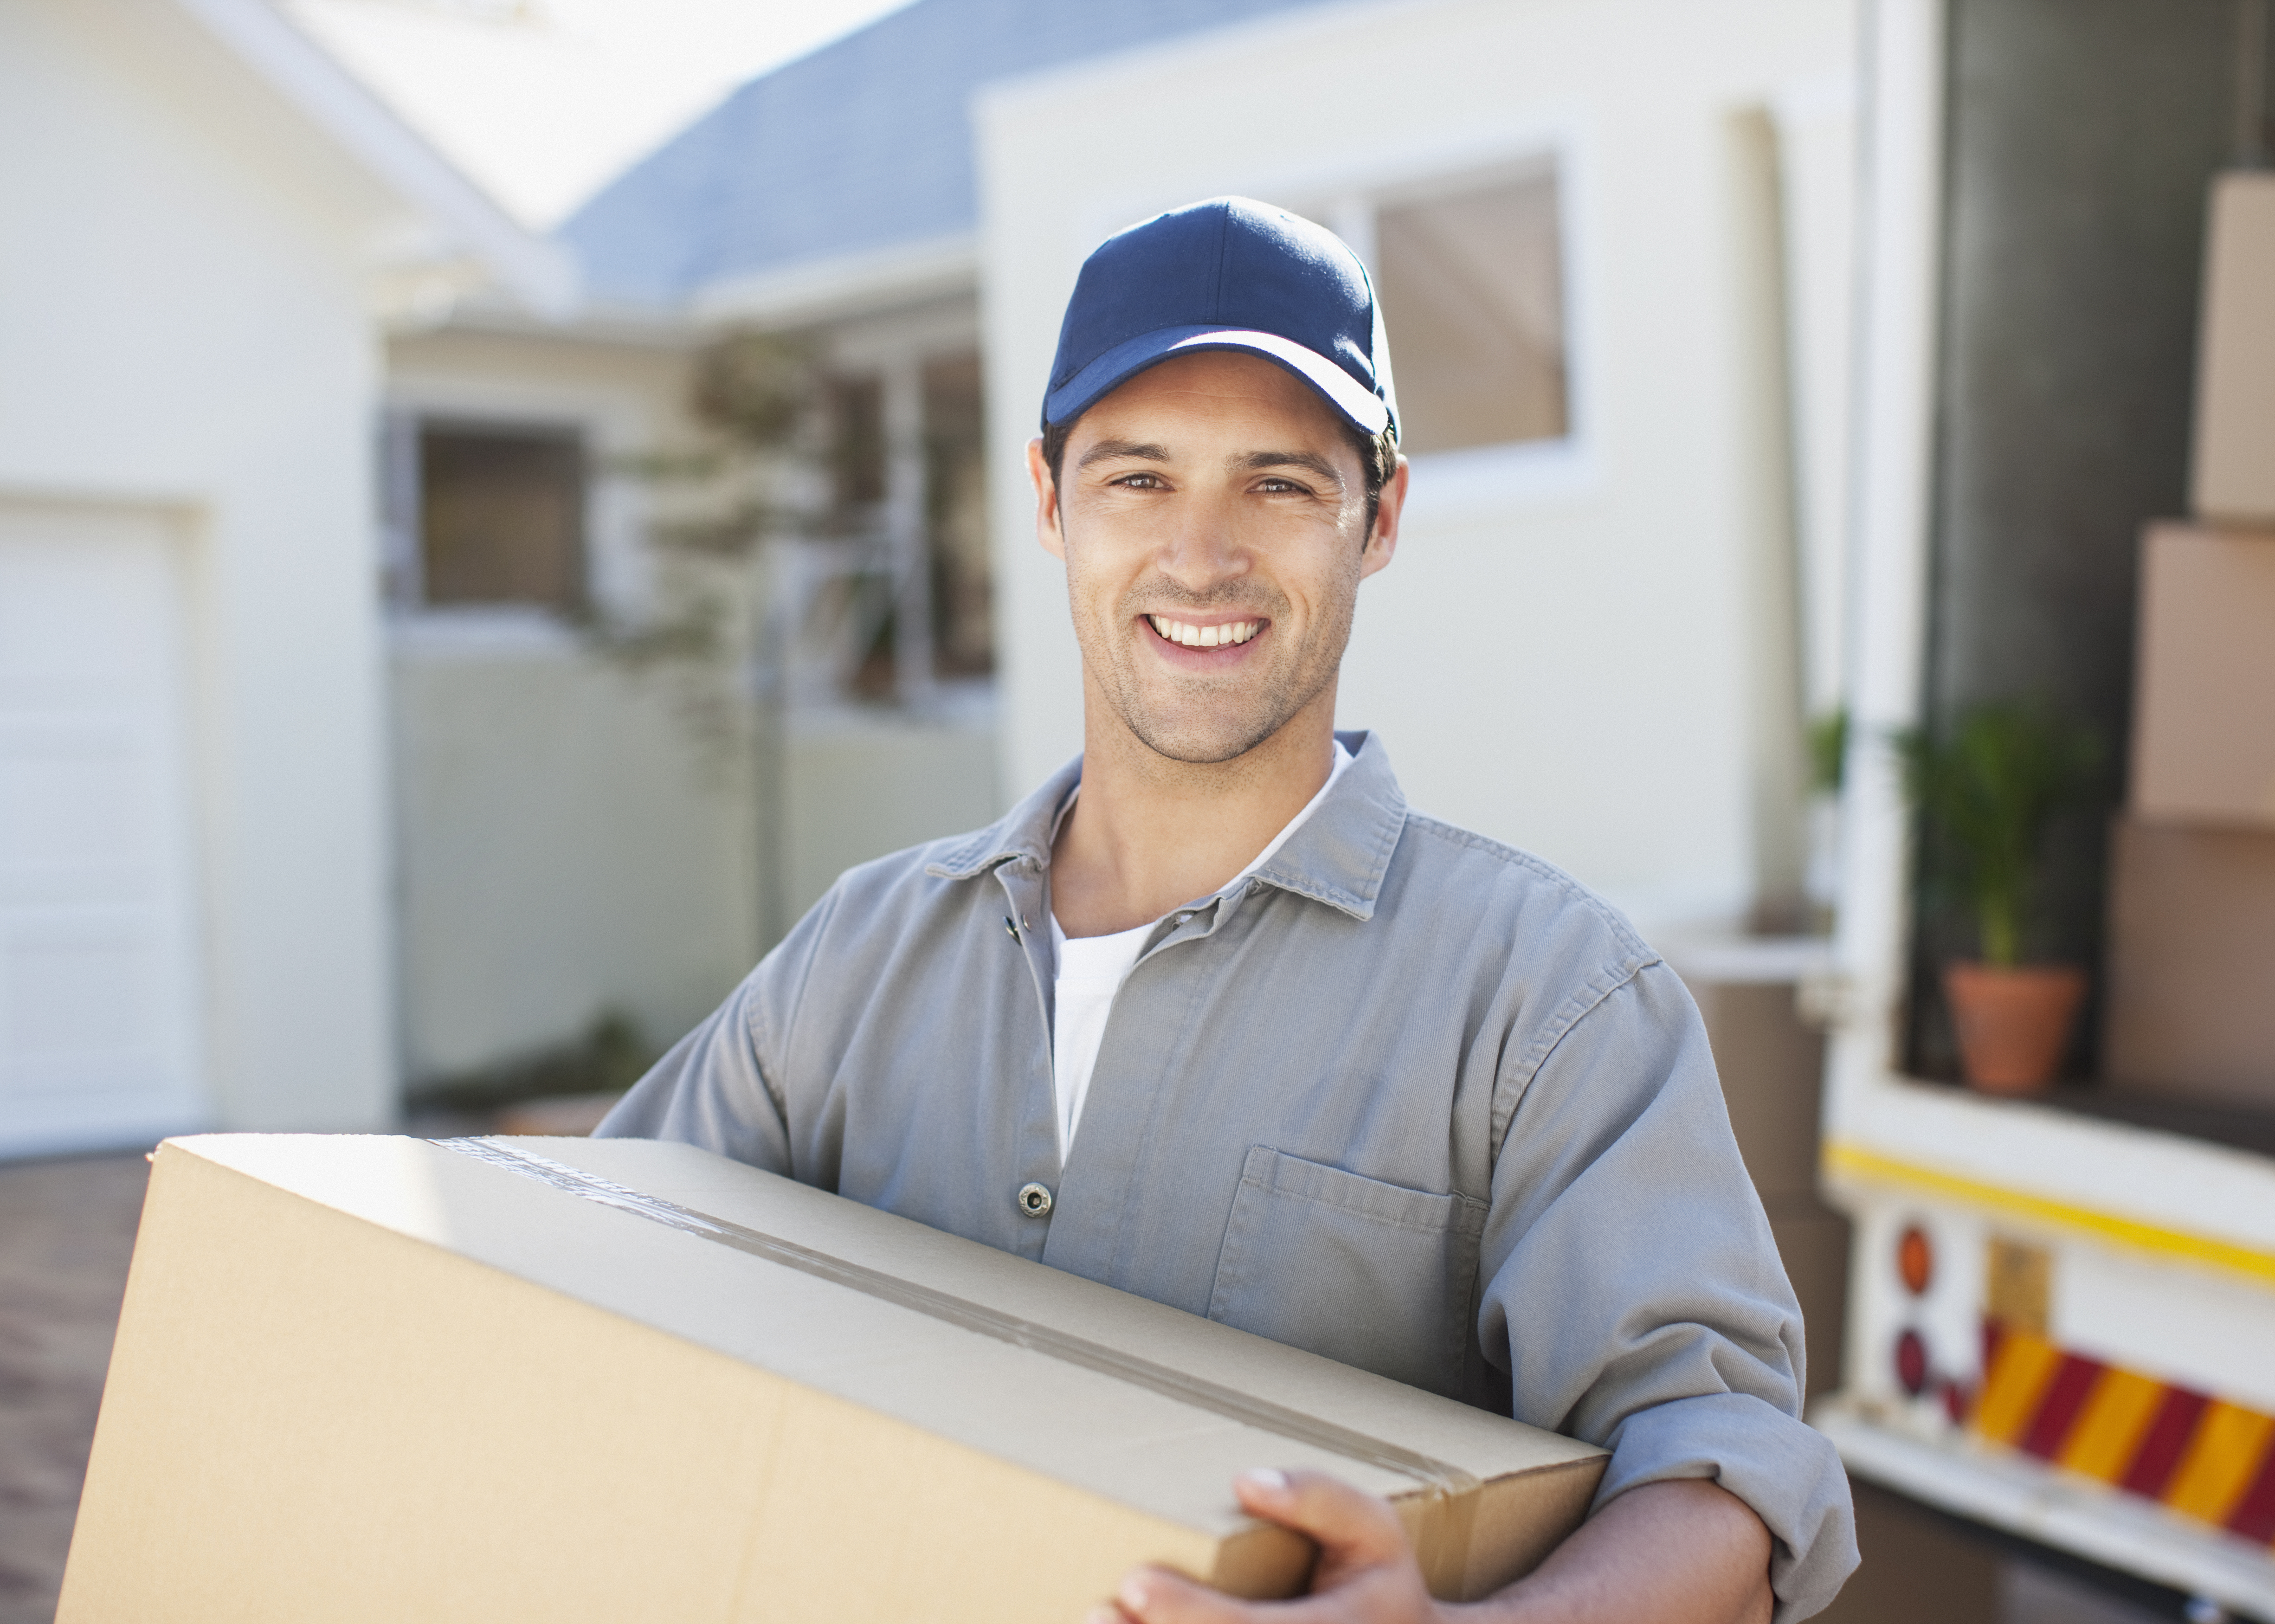 Smiling man carrying box from moving van